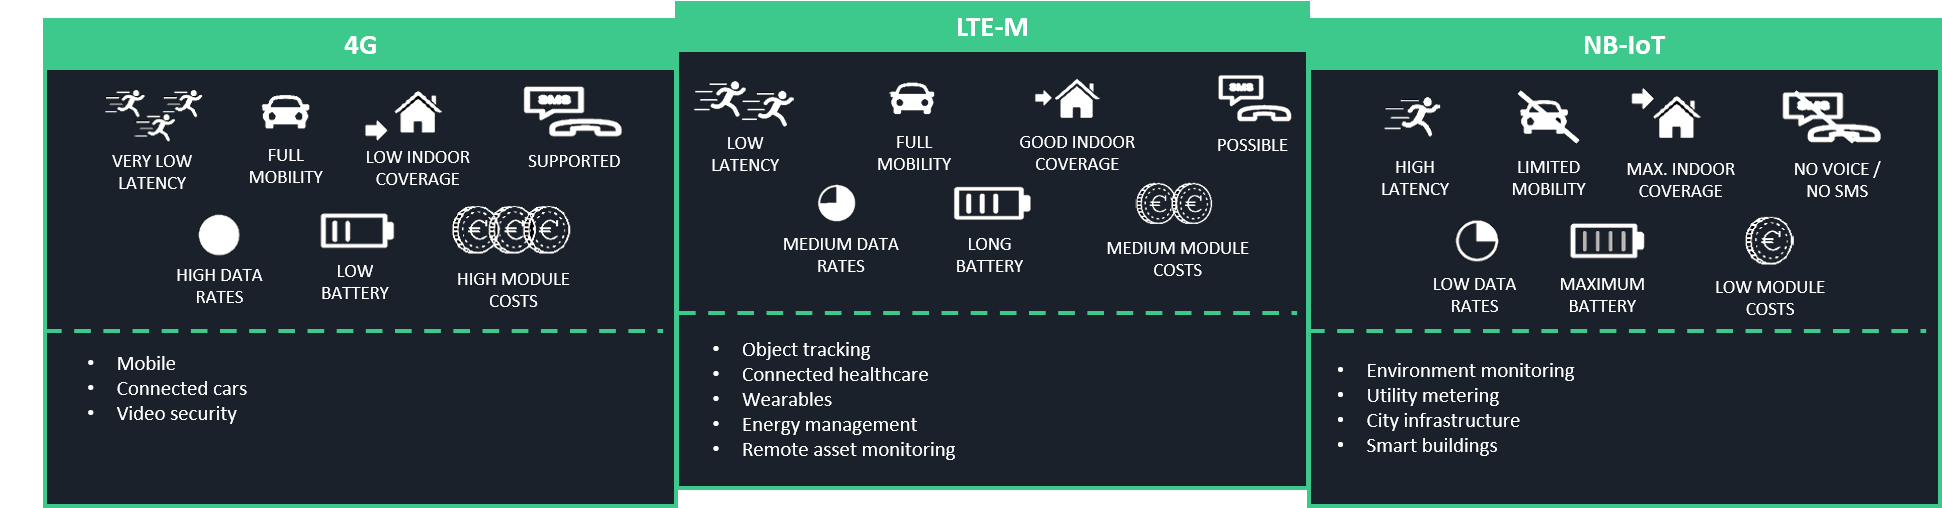 Comparison between 4G, LTE-M and NB-IoT